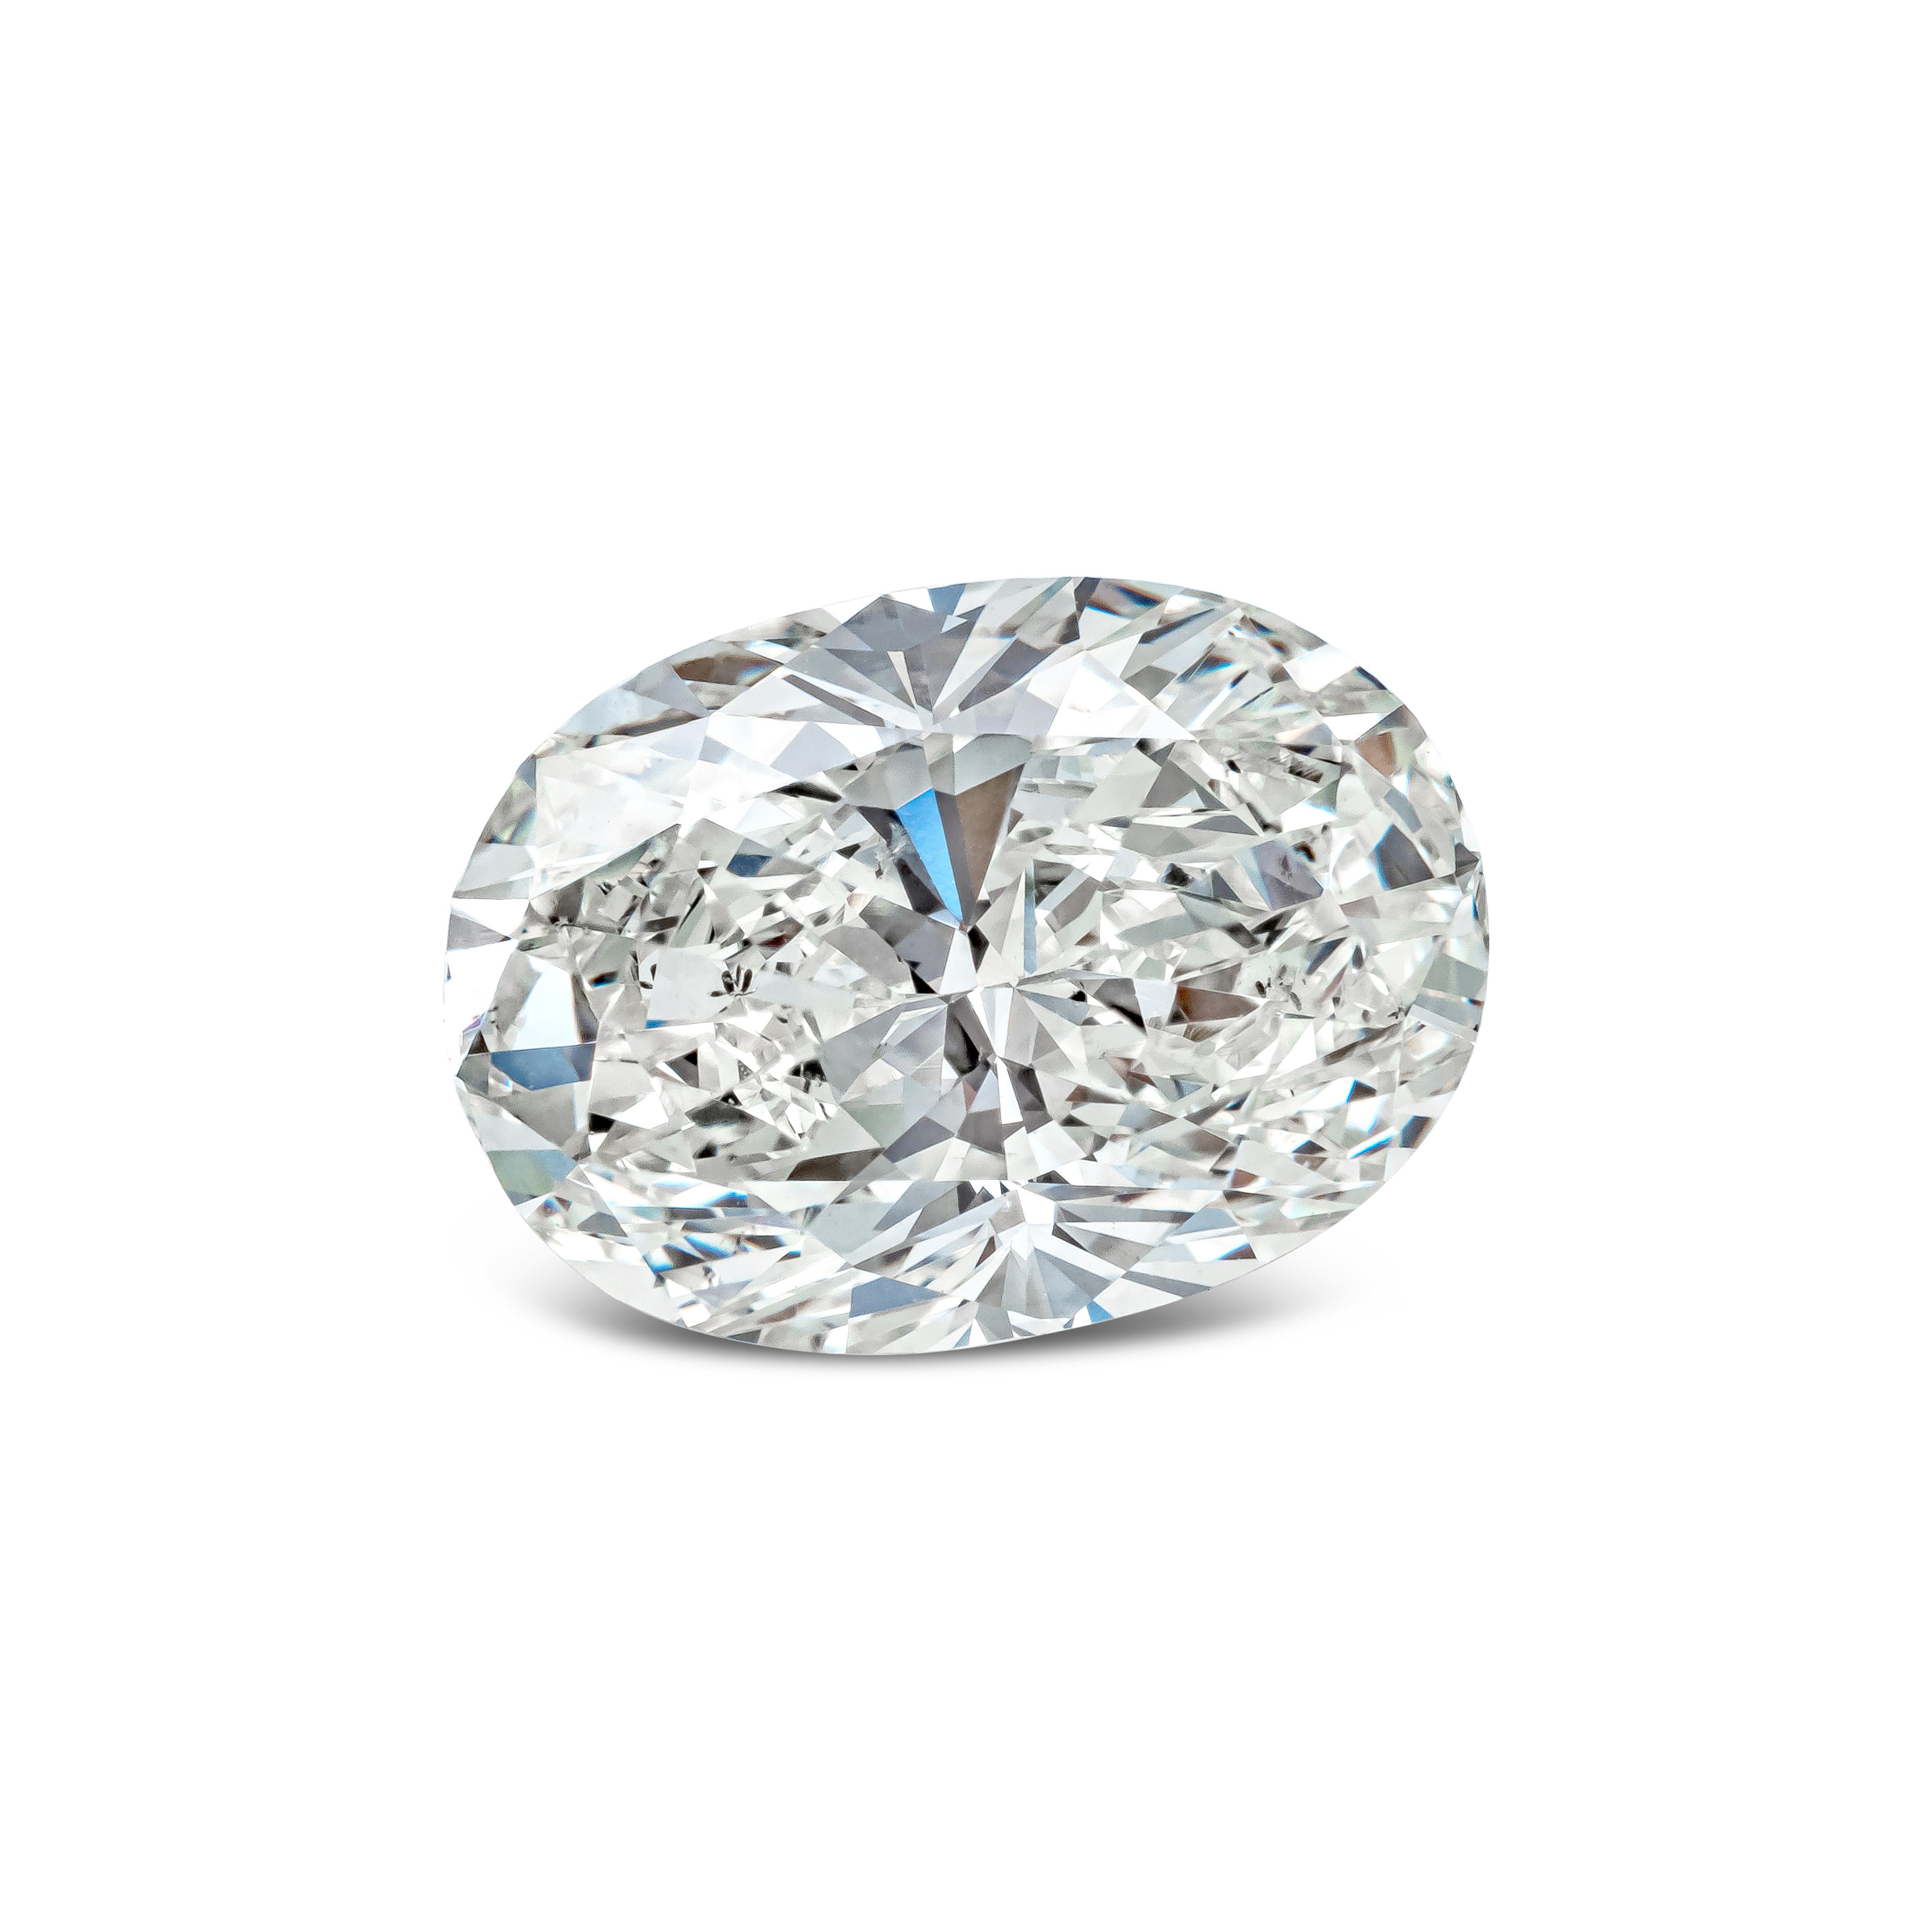 An oval cut loose diamond weighing 3.02 carats and is certified by GIA as J color, SI1 clarity, Very Good Polish and Good Symmetry. The diamond measures 10.80 x 7.81 x 4.98 millimeters. 

Available to be set in a custom handcrafted setting of your